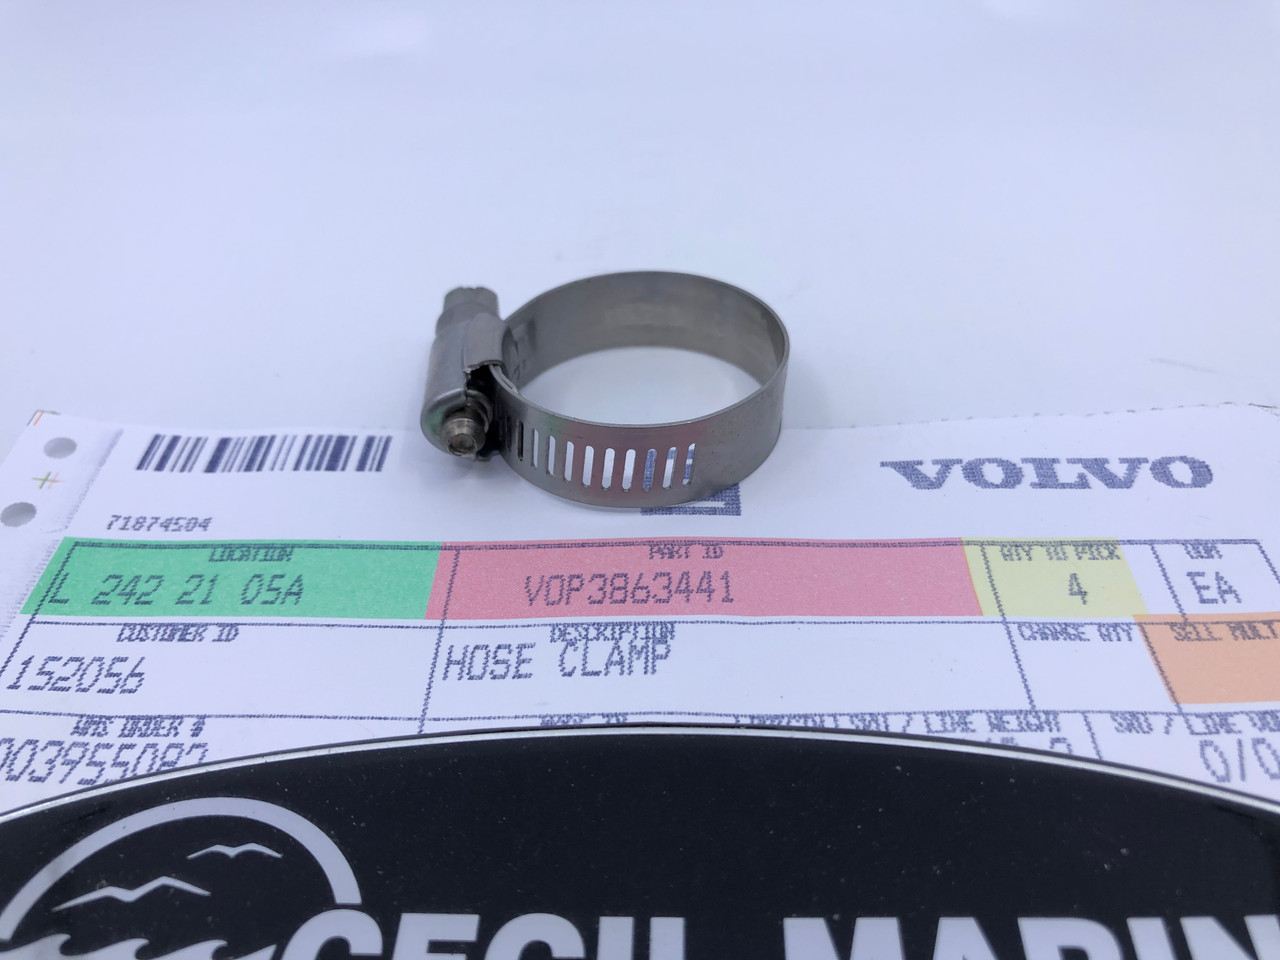 $9.99* GENUINE VOLVO HOSE CLAMP 3863441 GENUINE VOLVO HOSE CLAMP *In Stock & Ready To Ship!